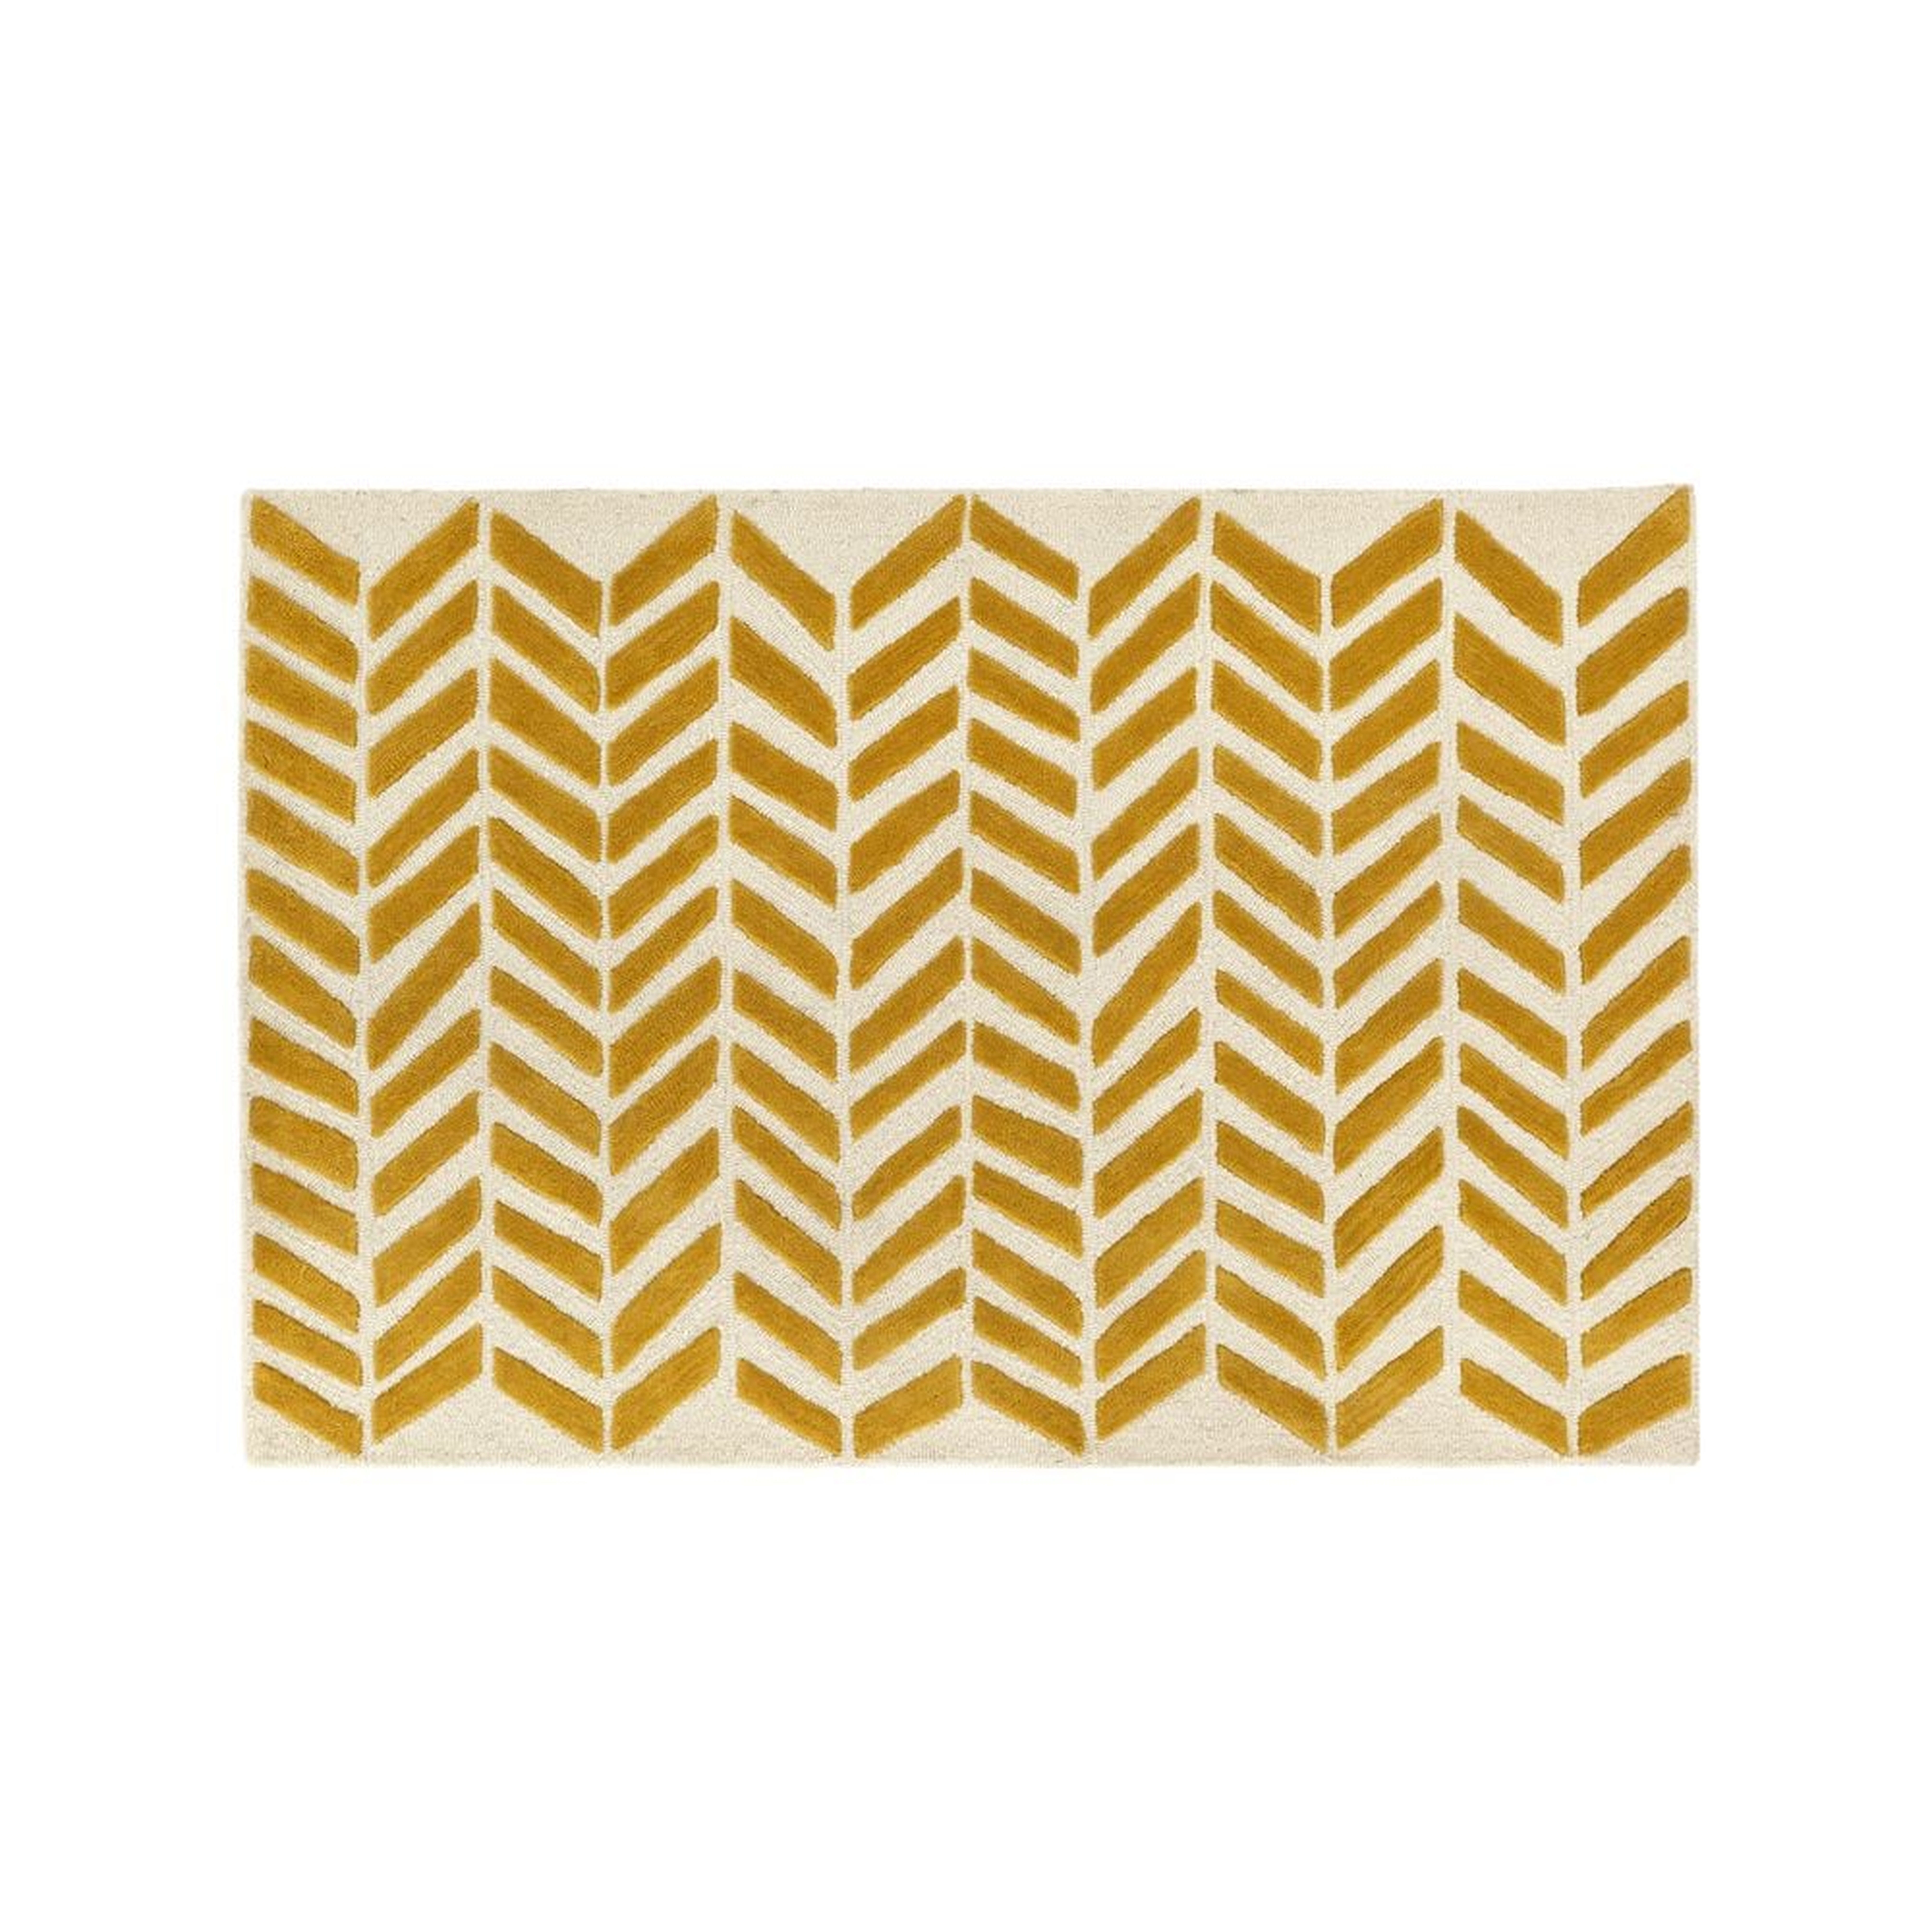 4x6' Yellow Chevron Rug - Crate and Barrel